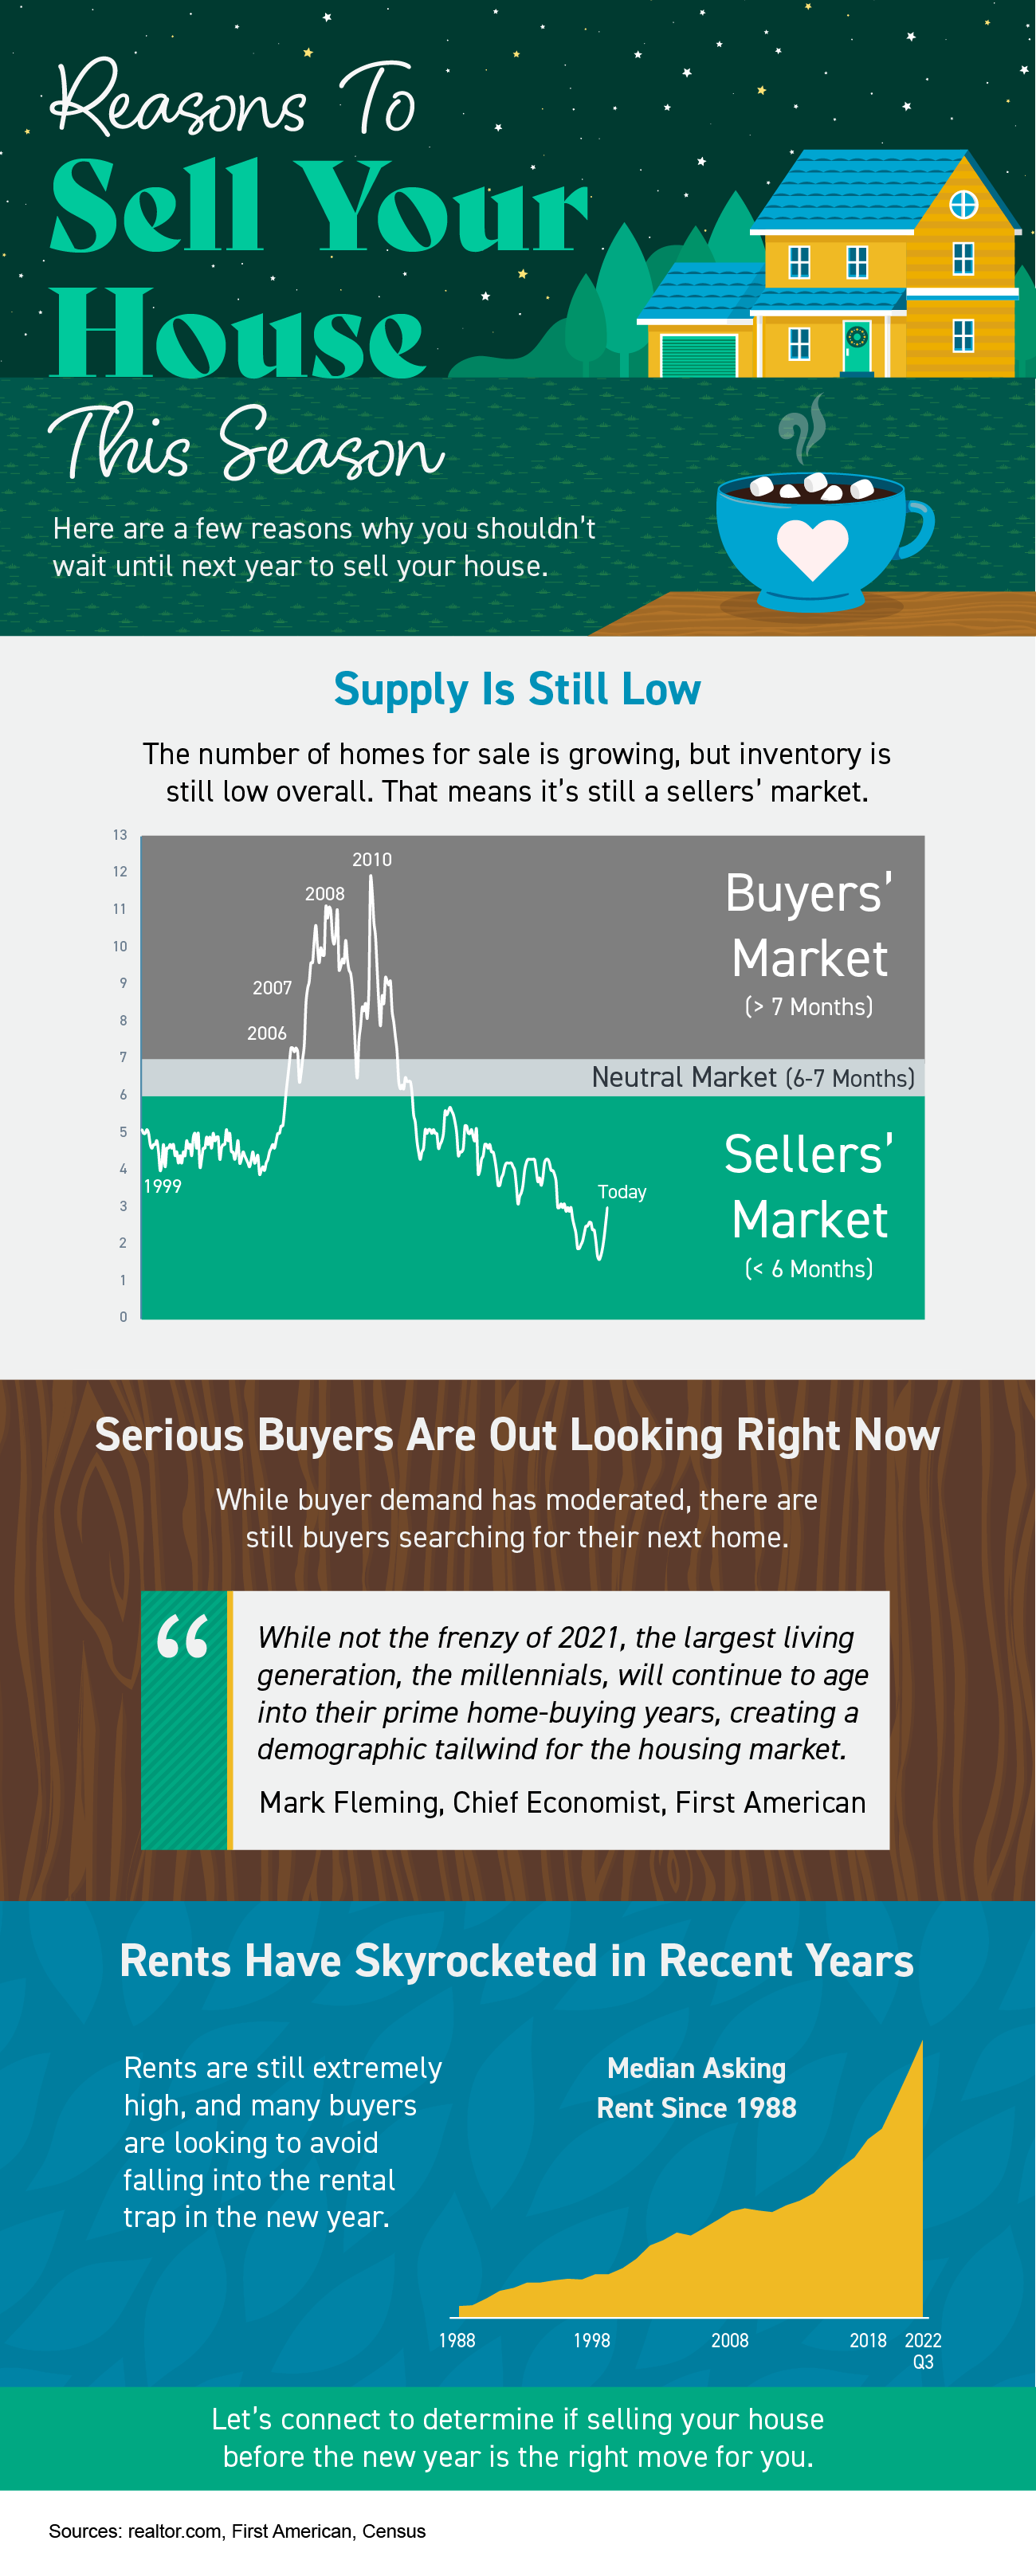 Reasons To Sell Your House This Season - KM Realty Group LLC, Chicago, Illinois